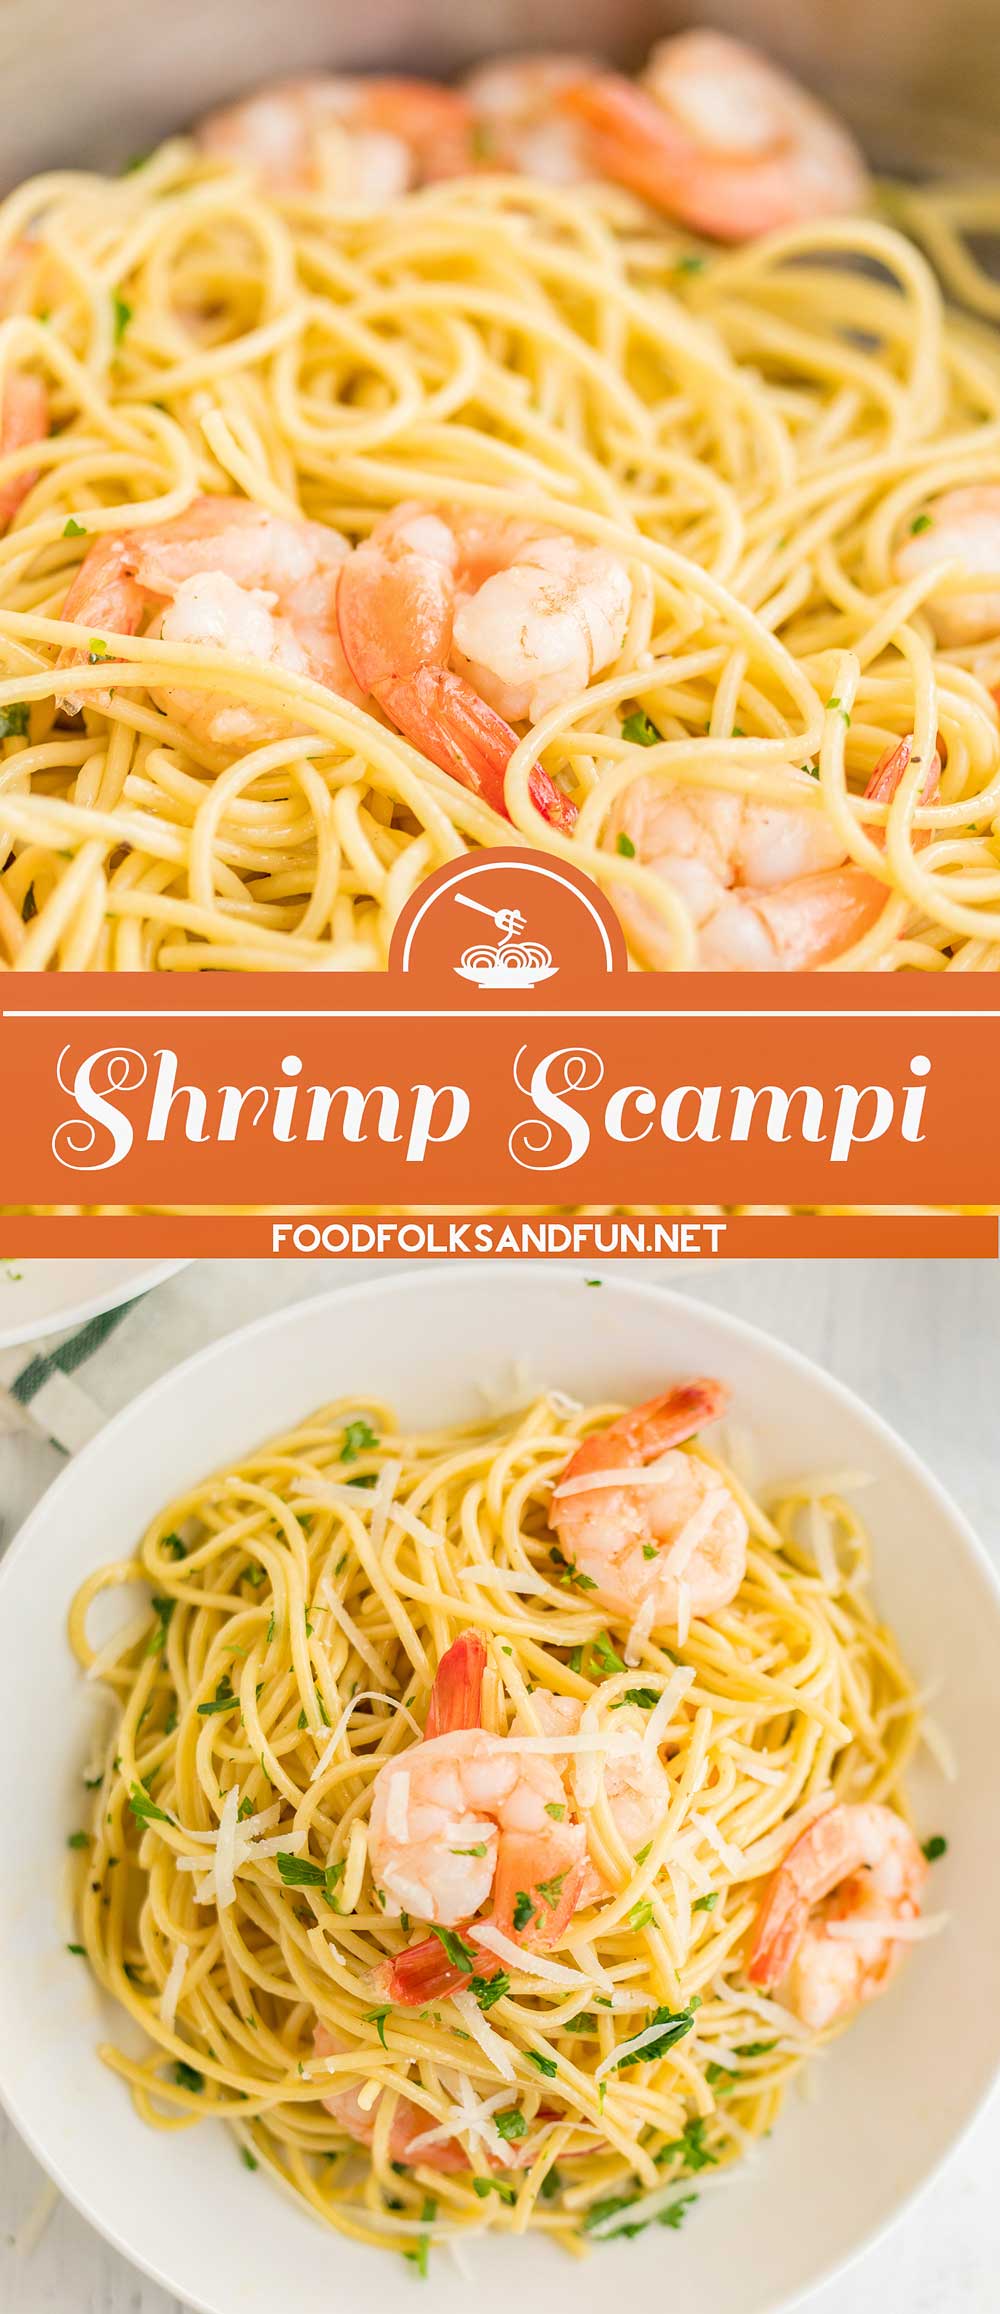 Classic Shrimp Scampi Pasta is an easy Italian comfort food recipe! It’s made with butter, garlic, white wine, chicken stock, lemon juice, parsley, and shrimp. via @foodfolksandfun